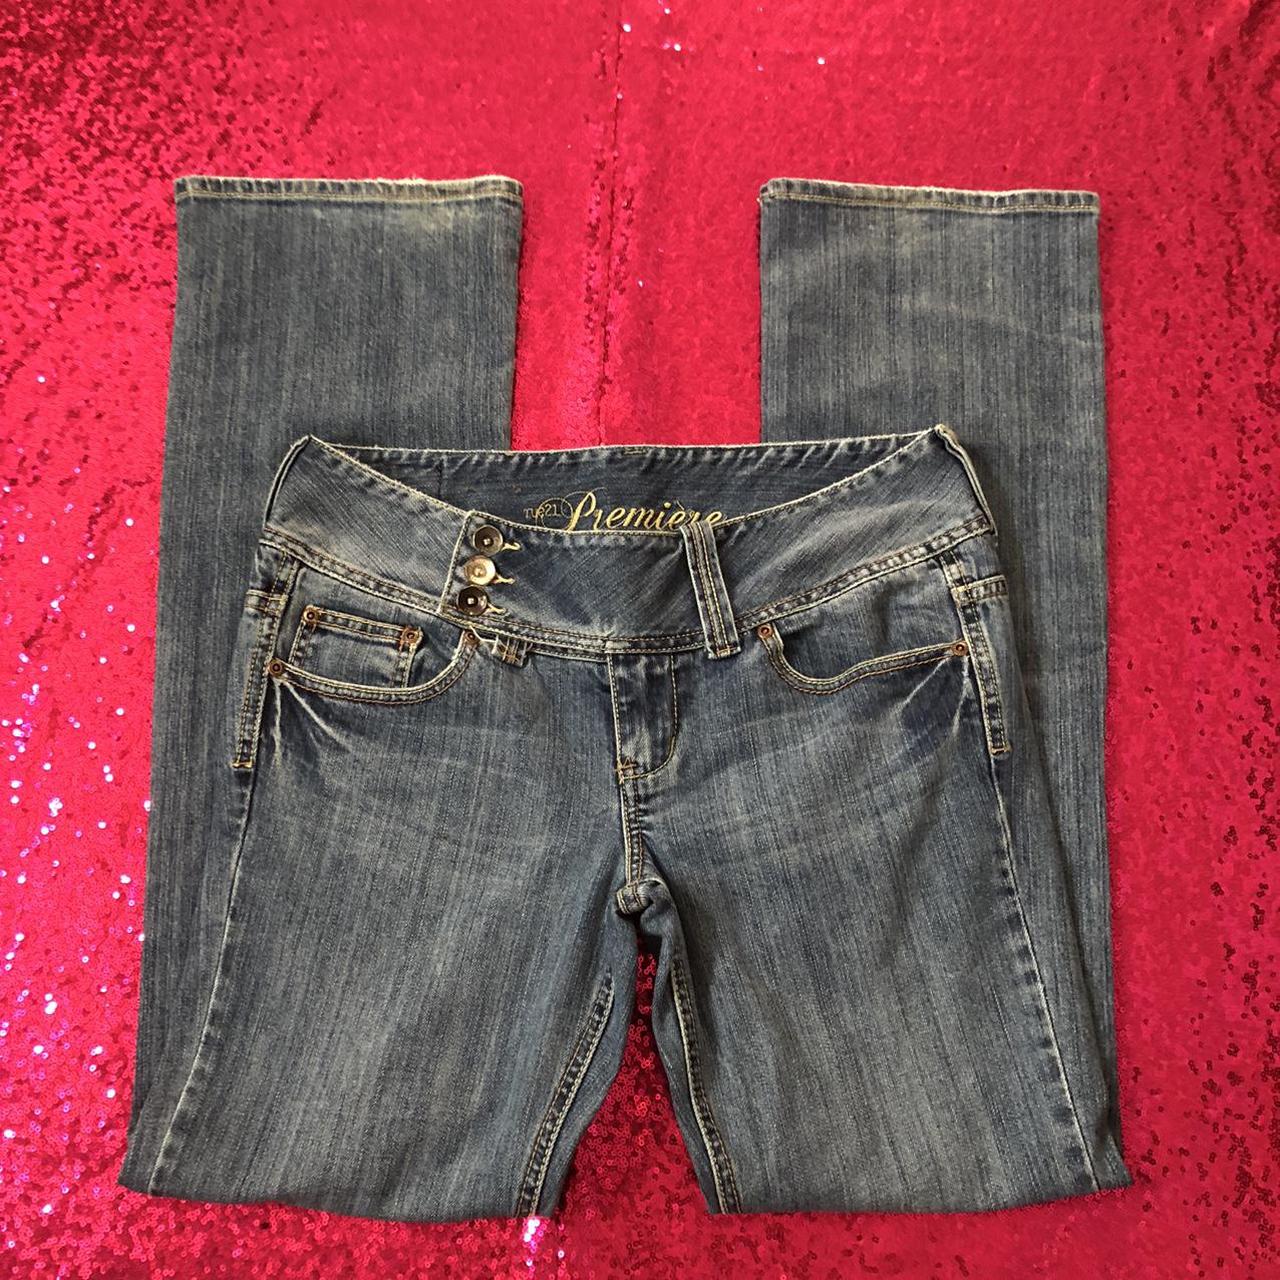 Product Image 2 - ⚡️ the y2k bratz jeans!

❗️this